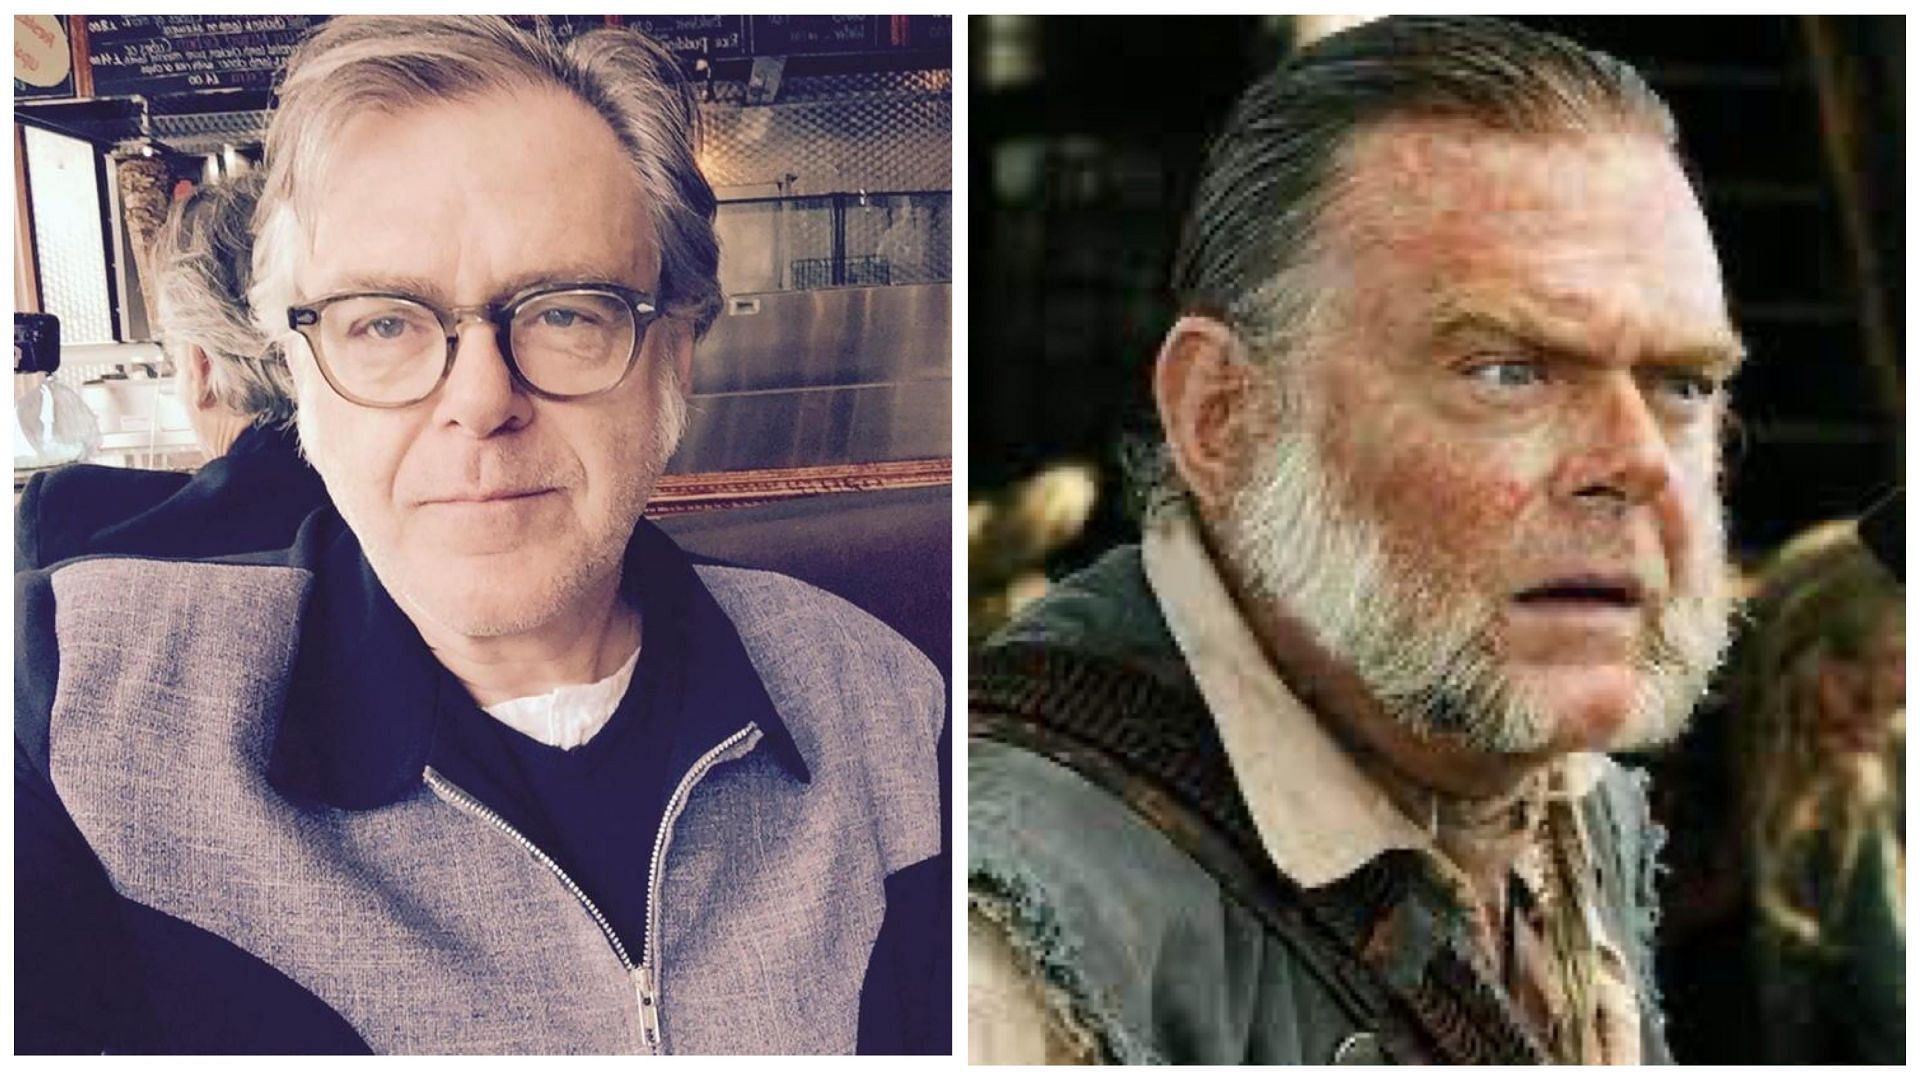 Pirates of the Caribbean star Kevin McNally arrested on suspicon of domestic abuse (Image via @exkevinmcnally/X)